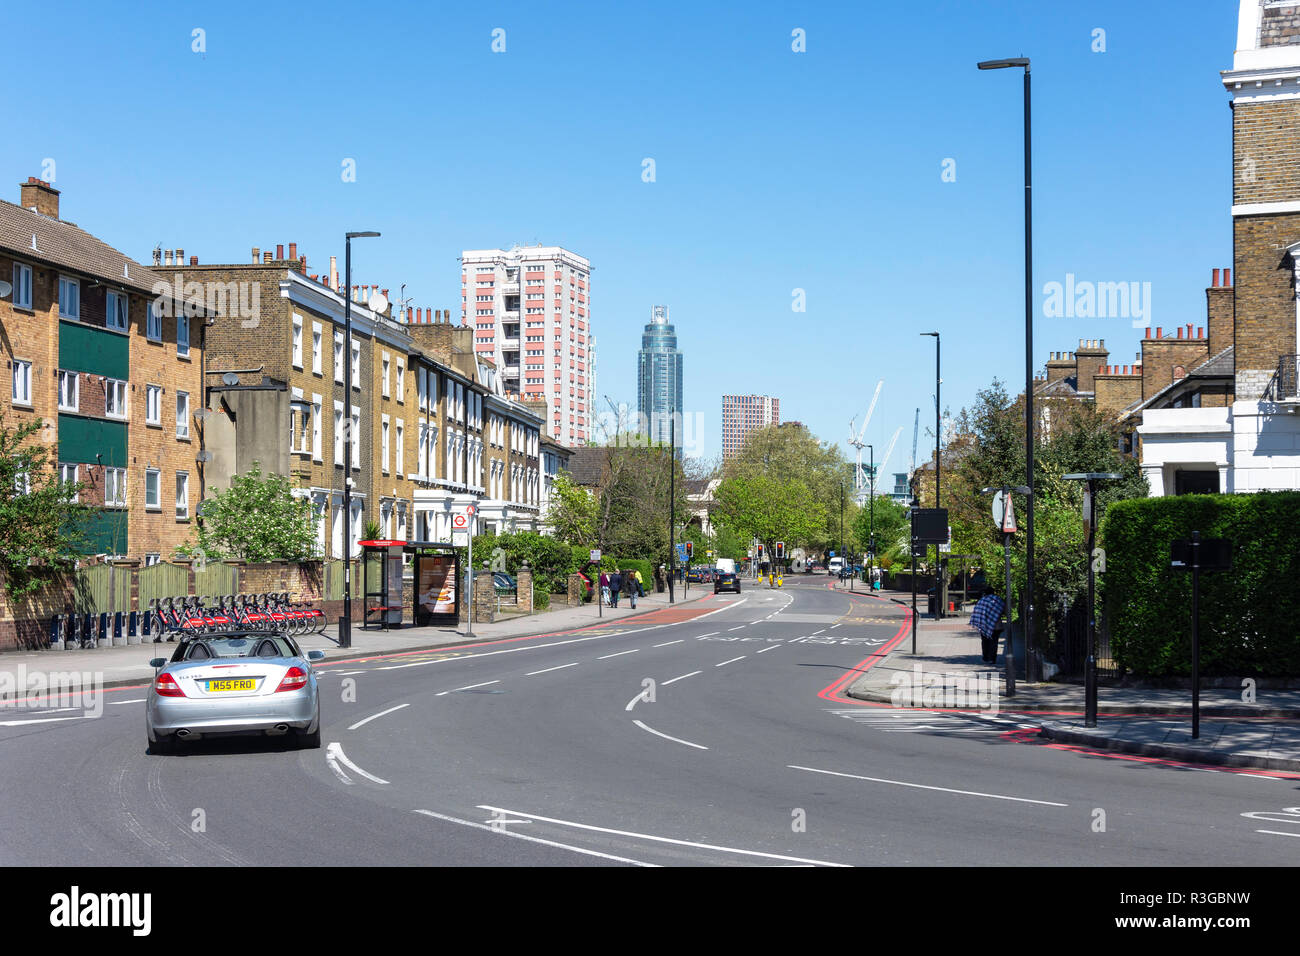 South Lambeth Road, Stockwell, London Borough of Lambeth, Greater London, Angleterre, Royaume-Uni Banque D'Images